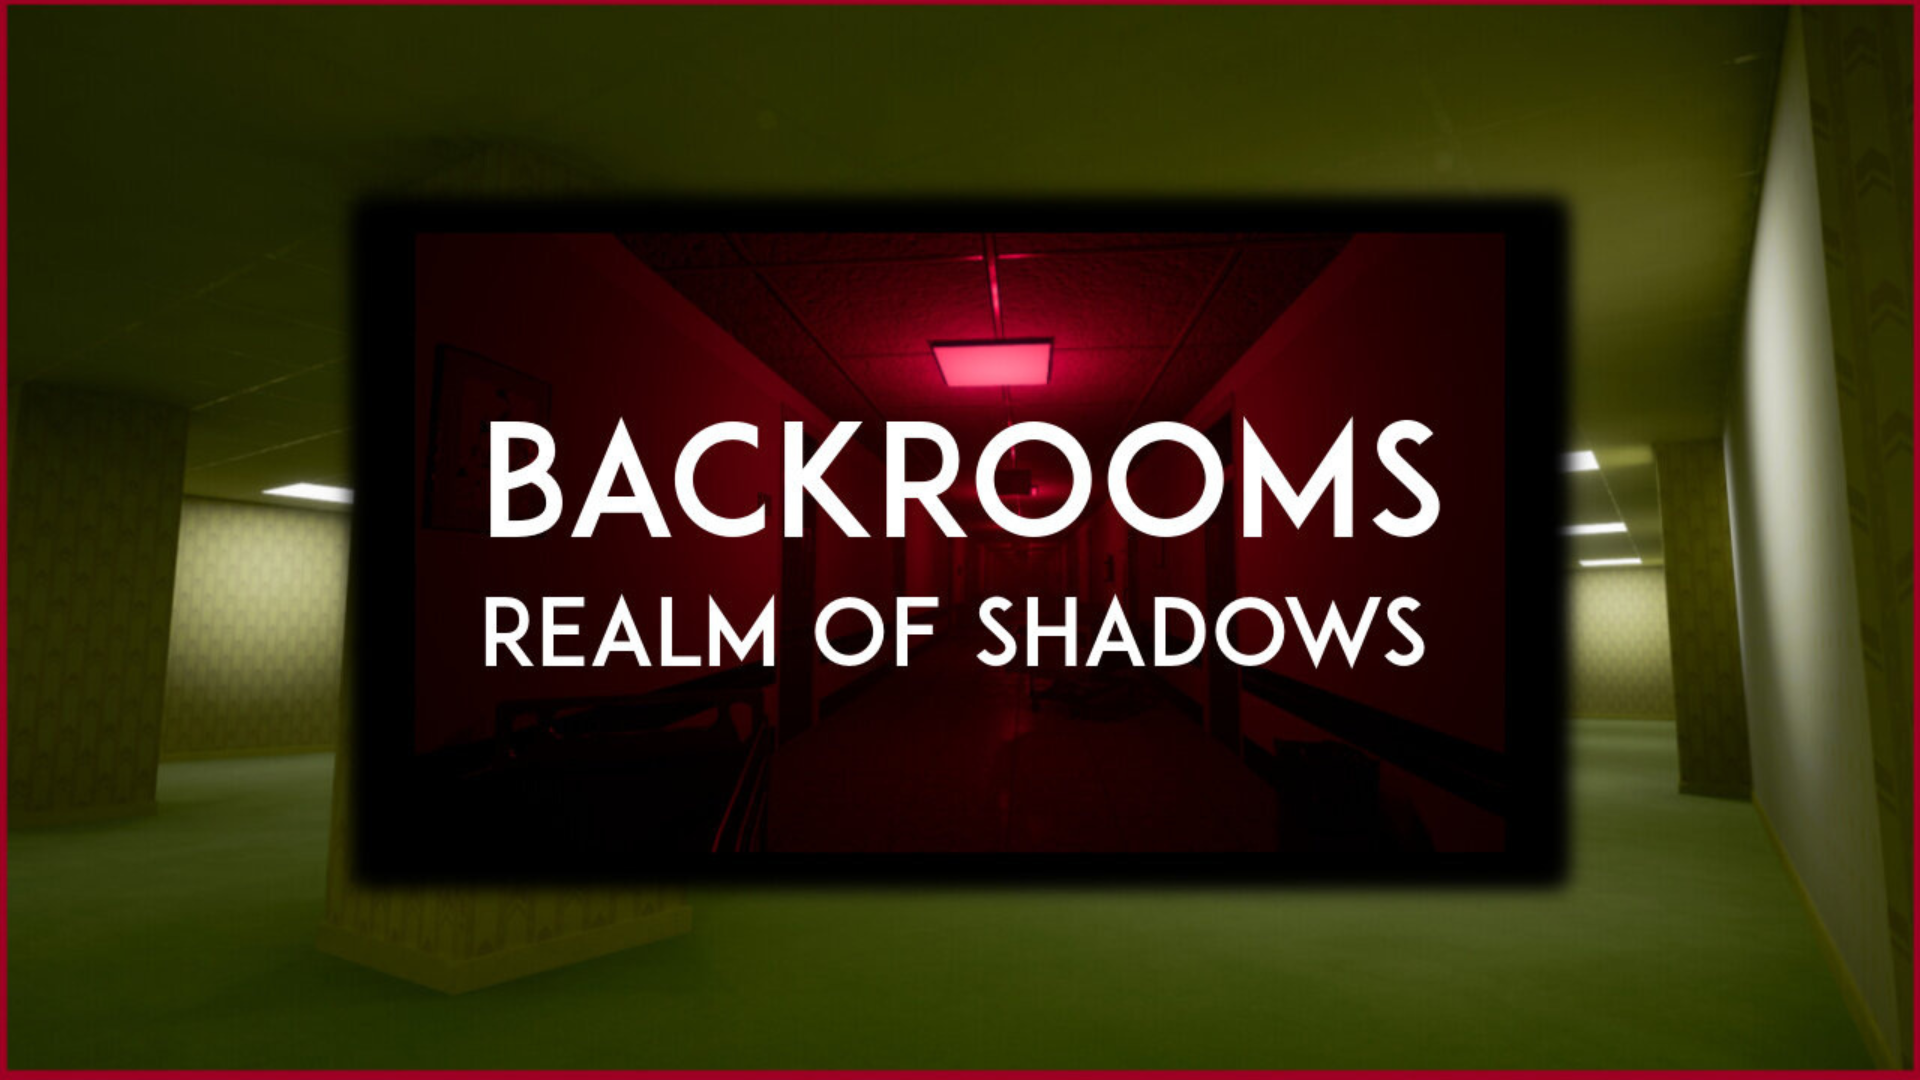 Backrooms: Realm of Shadows  Download and Play for Free - Epic